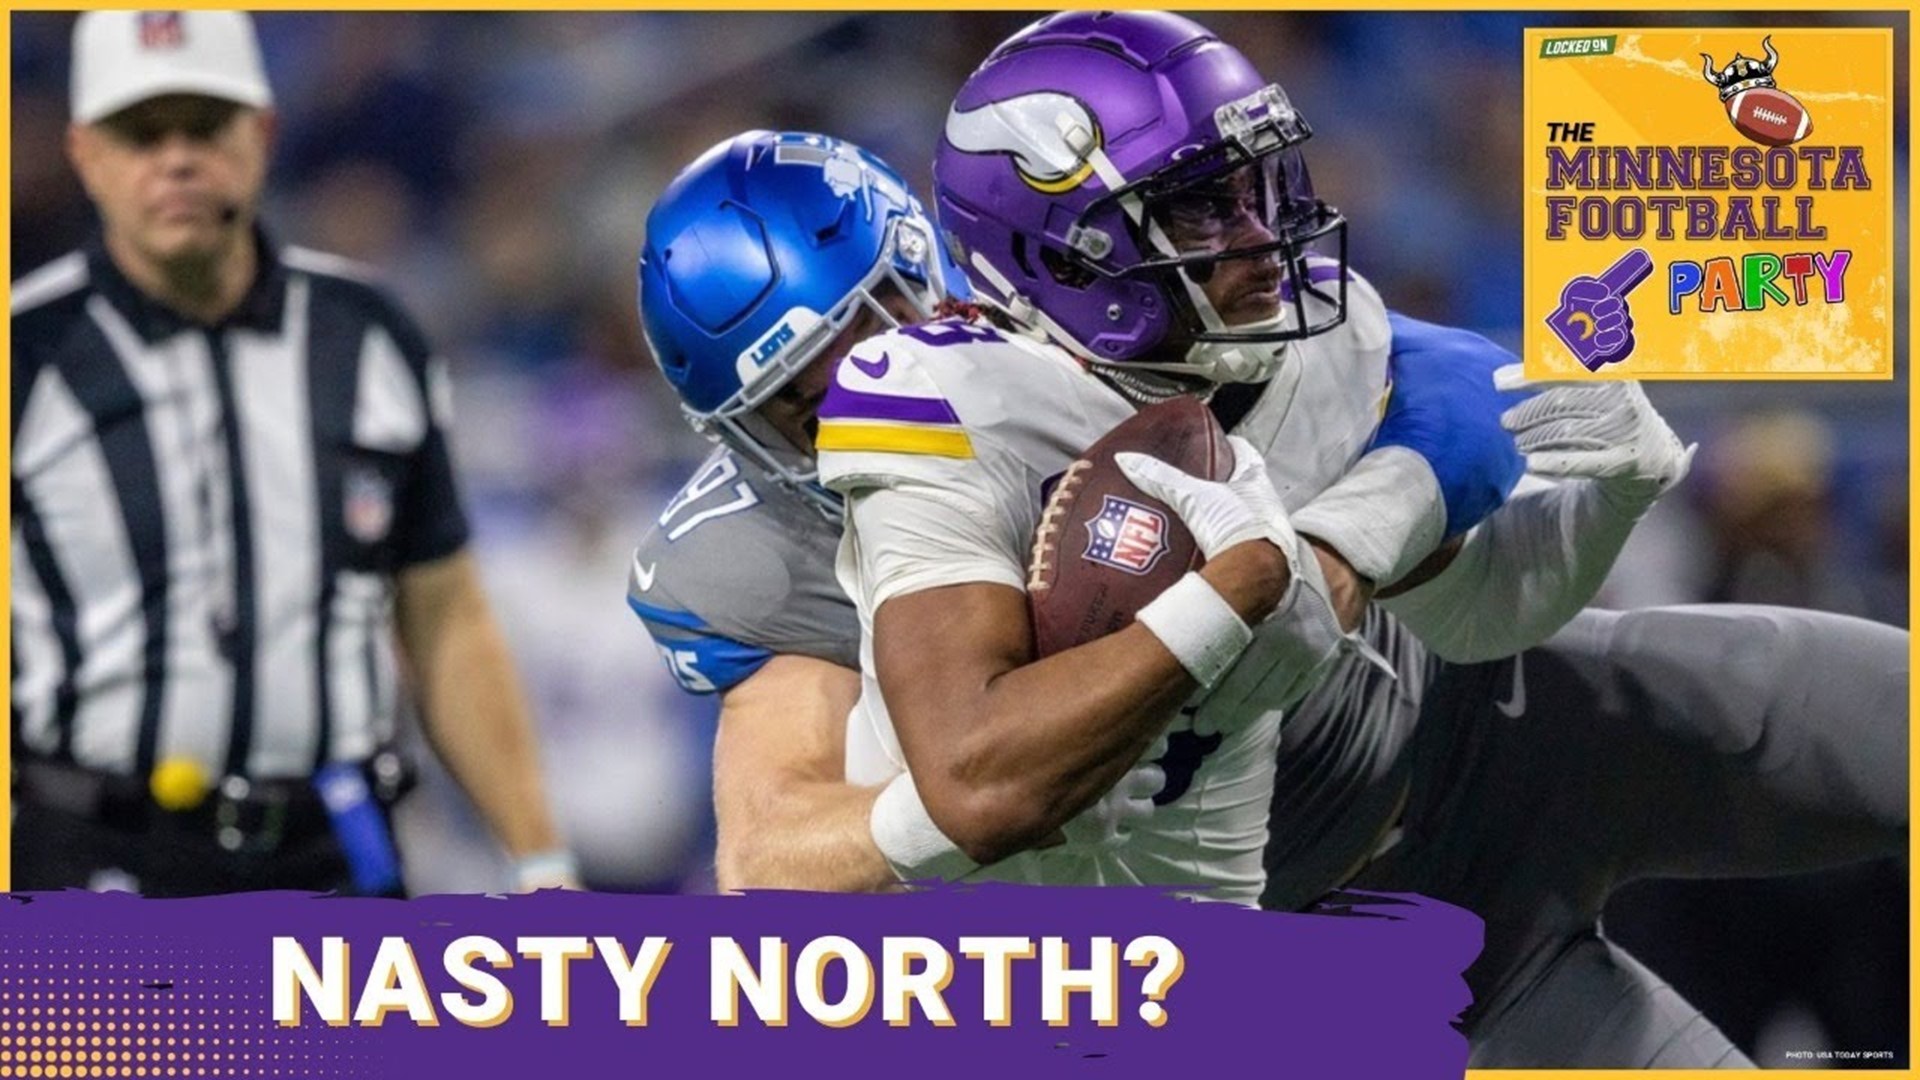 Are the Minnesota Vikings Undervalued in the NFC North? The Minnesota Football Party